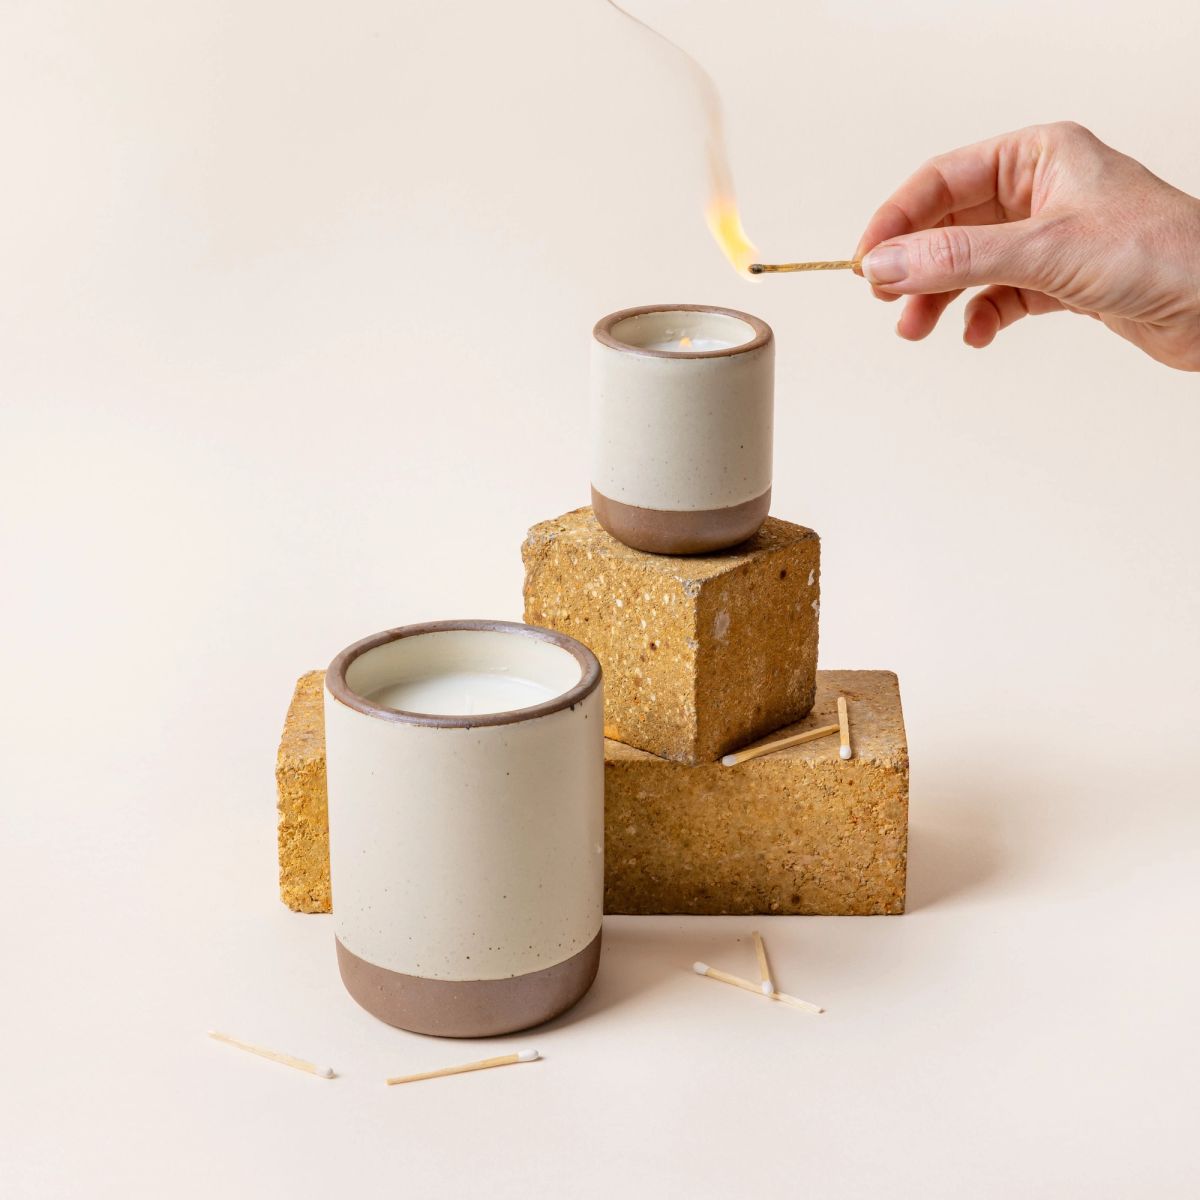 A large and small ceramic vessels in a warm, tan-toned, off-white color with candle inside each. A hand is holding a lit match to light the small candle. The candles are artfully arranged with brick and a few surrounding matches